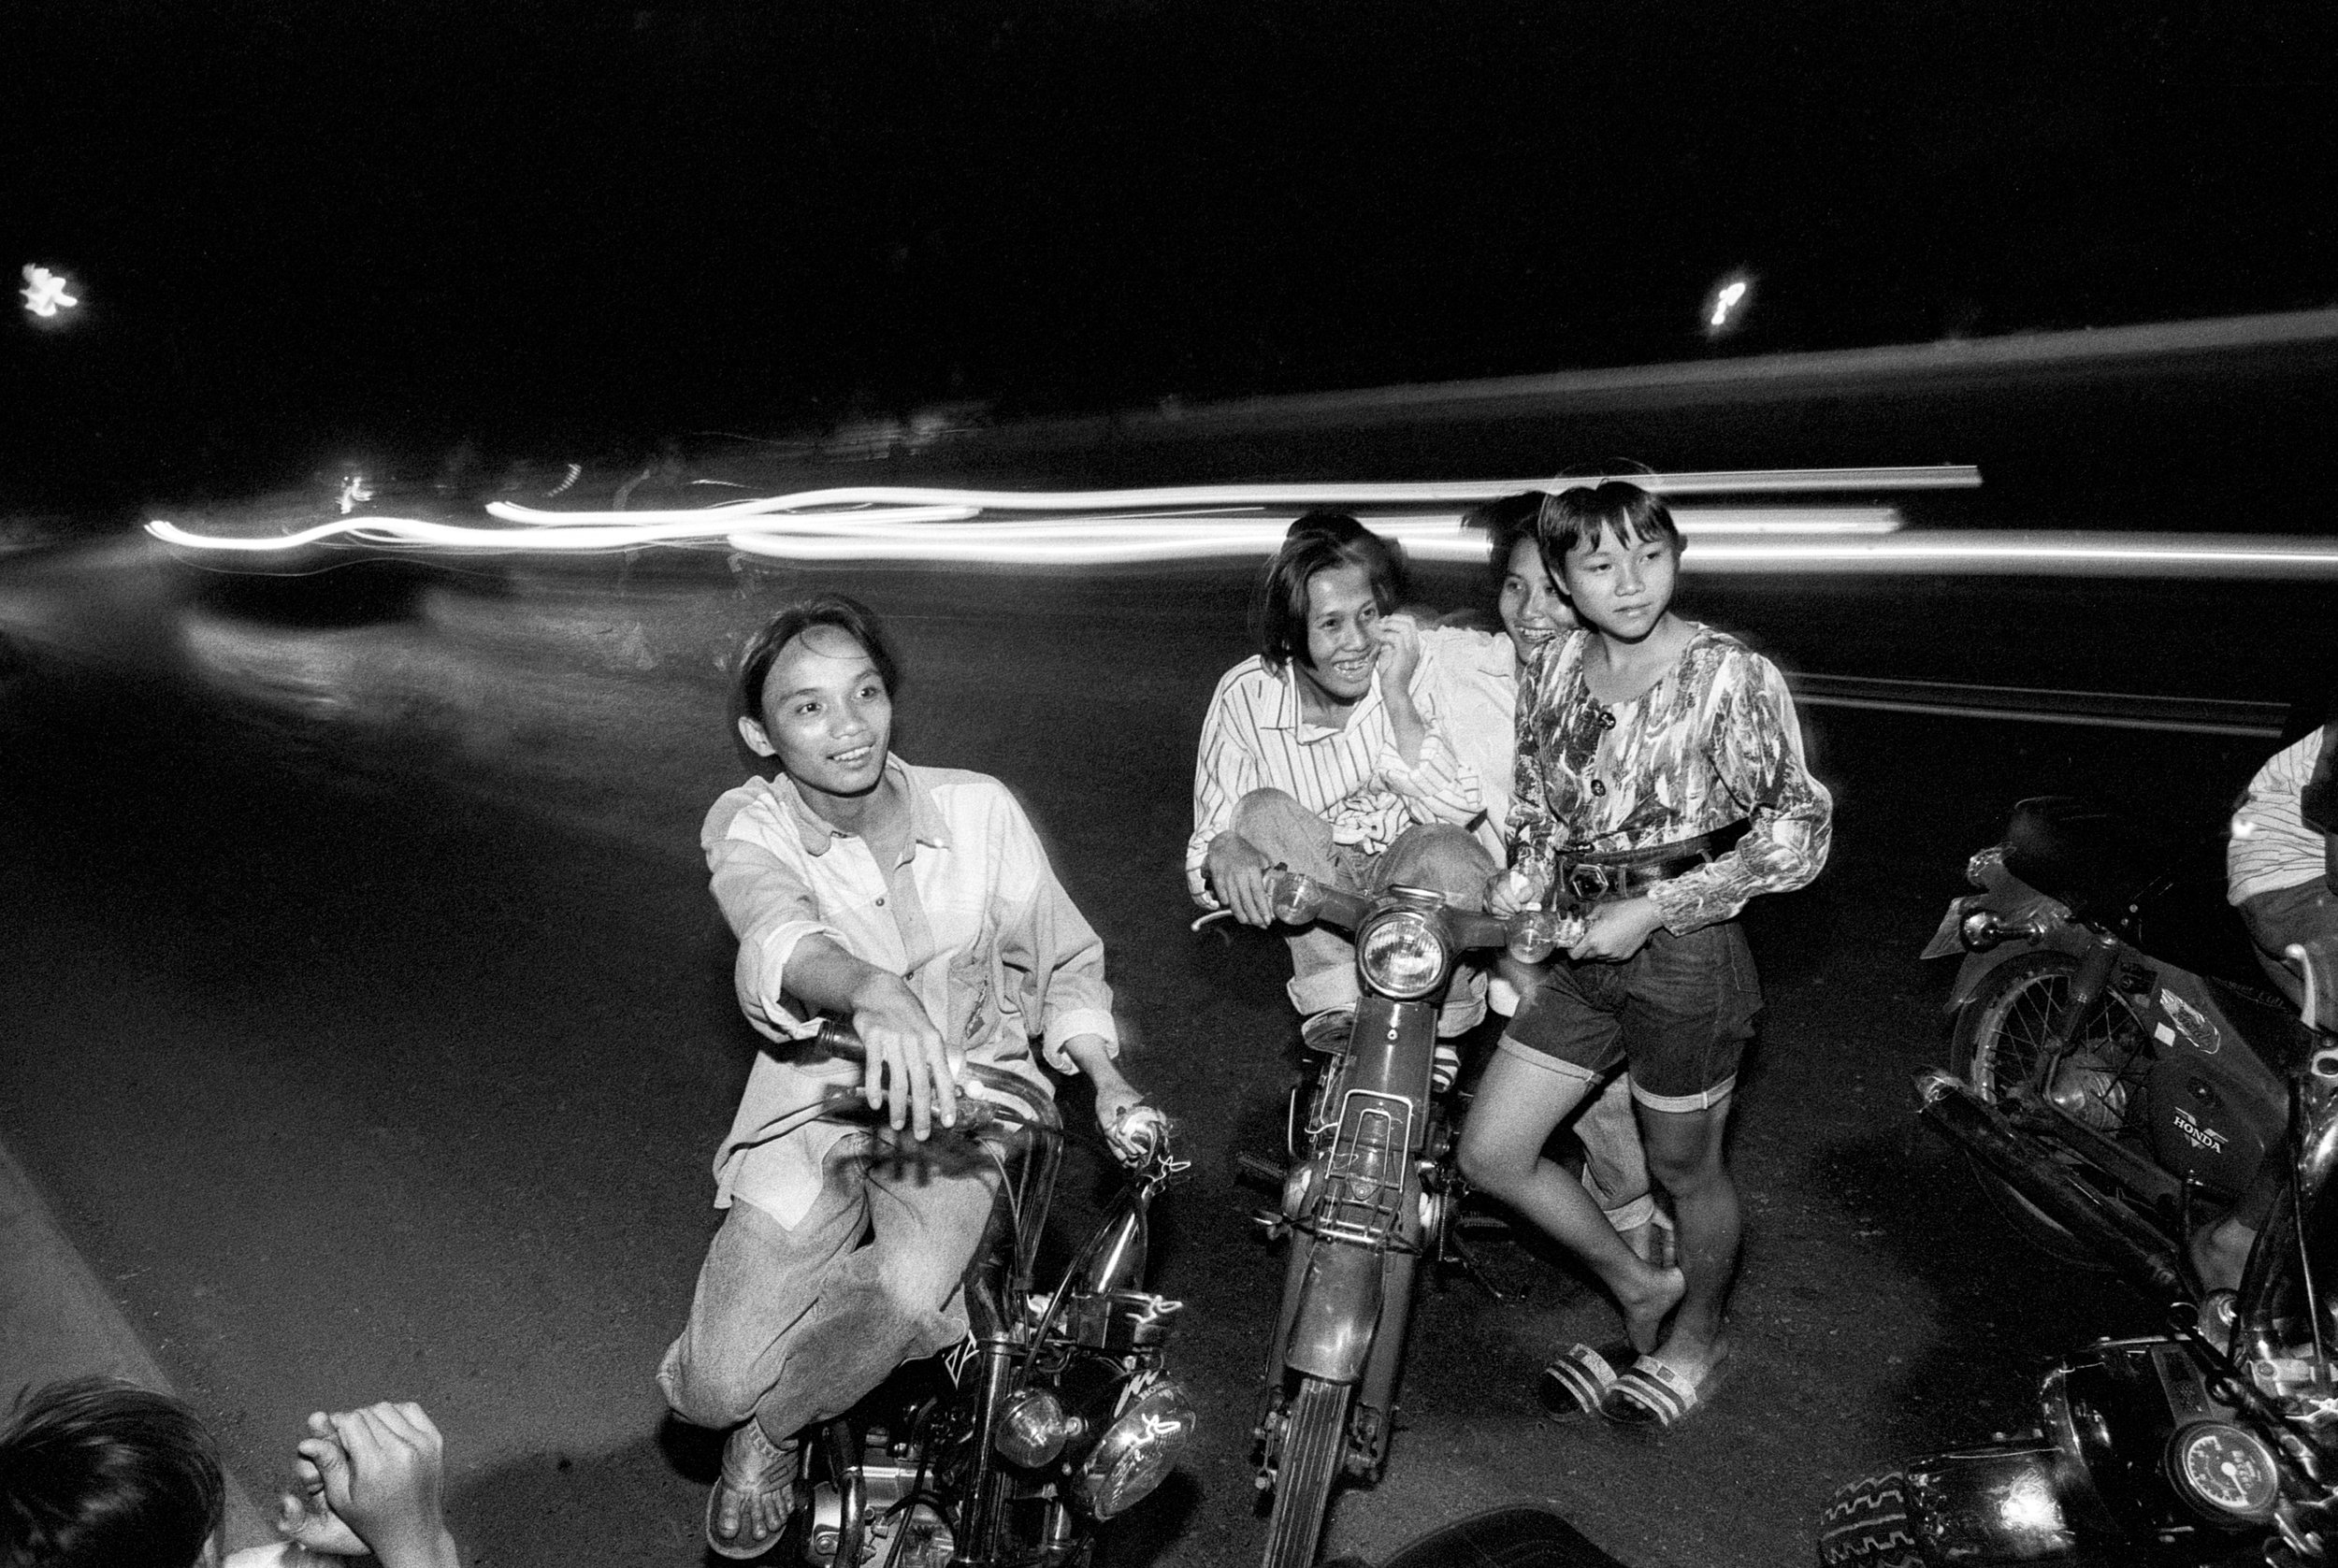  Saigon’s youth gather for a night out together. 